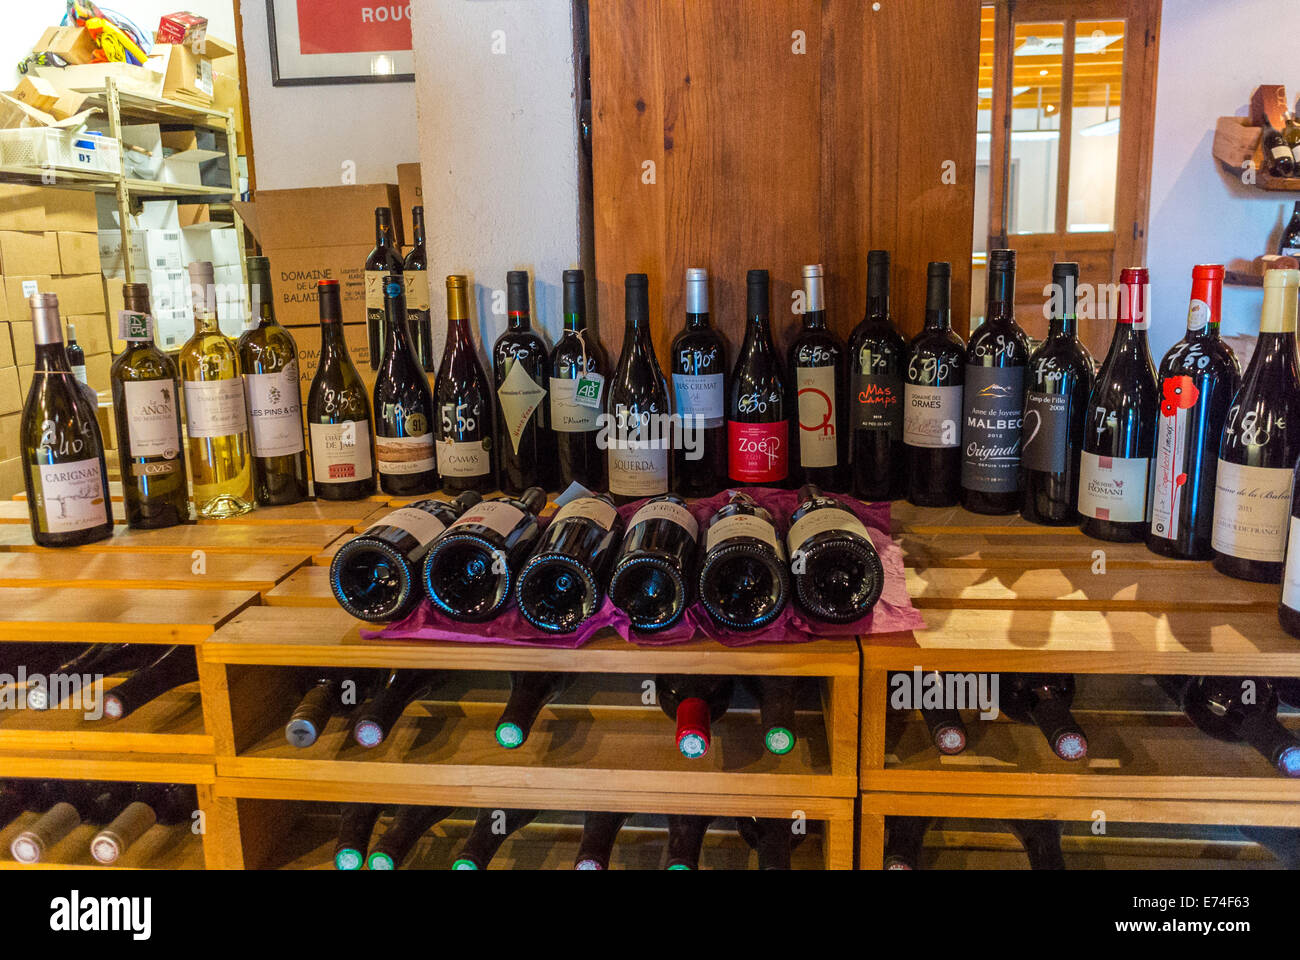 Perpignan, South of France, French WIne Bottles on Display in Store Stock Photo